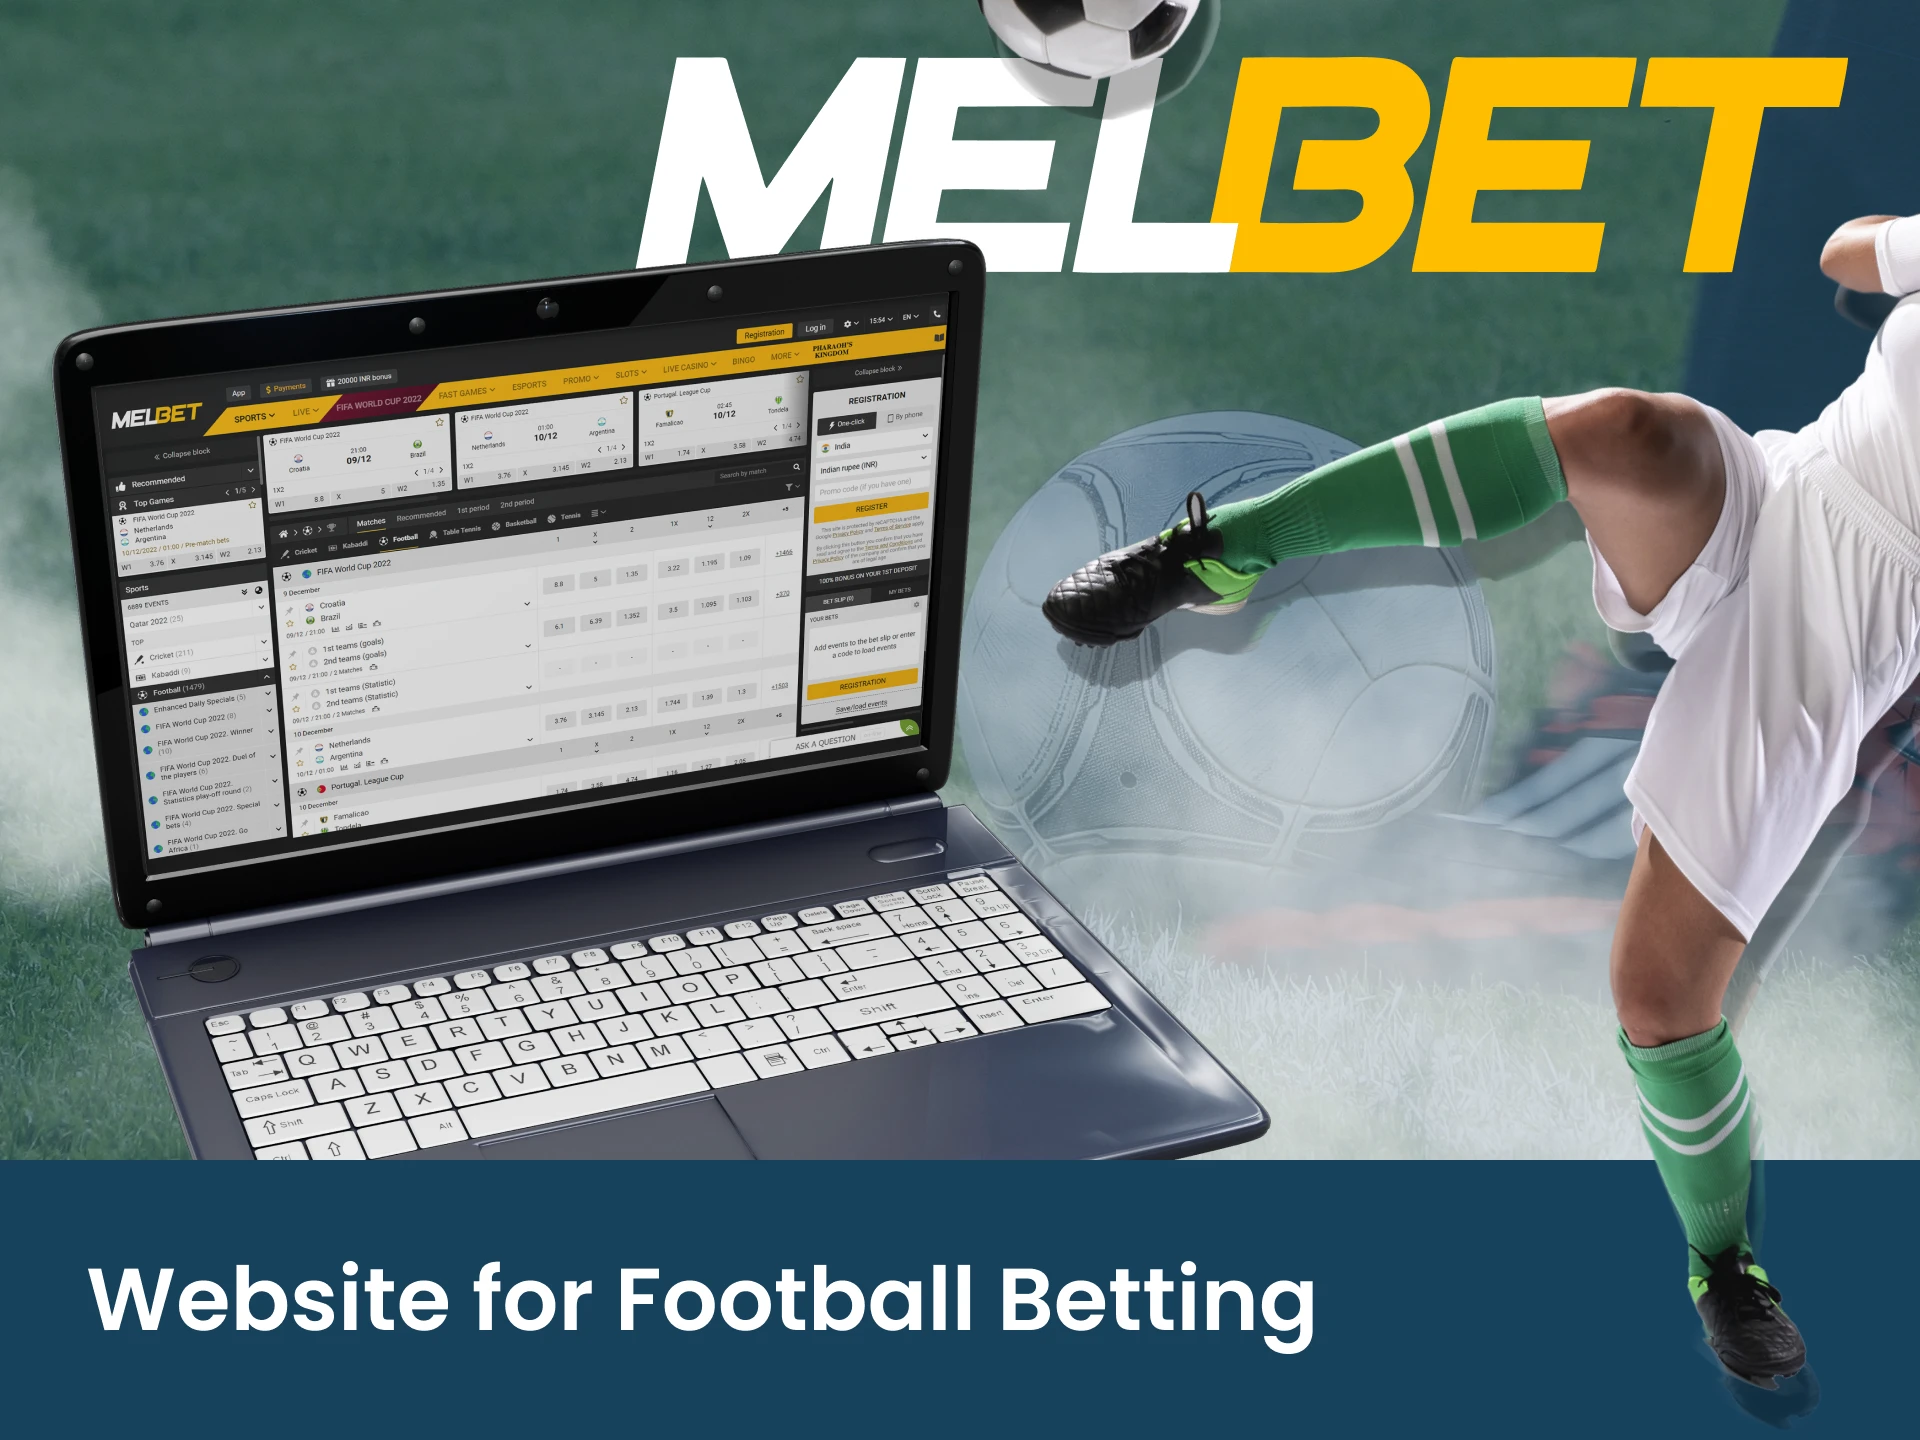 You can bet on football on the Melbet website.